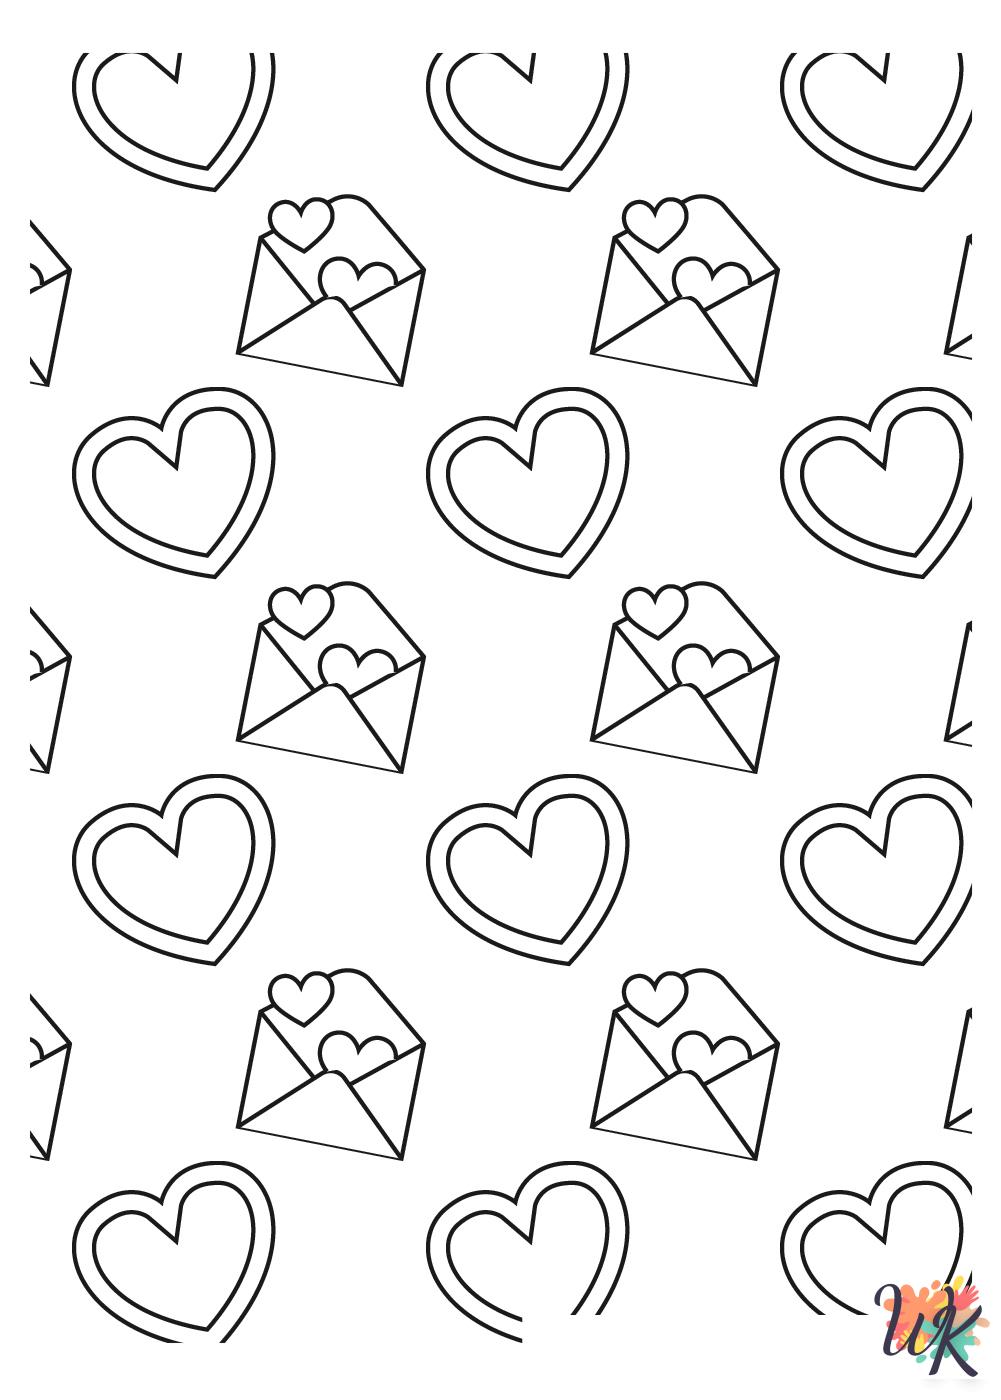 Valentine's Day ornaments coloring pages